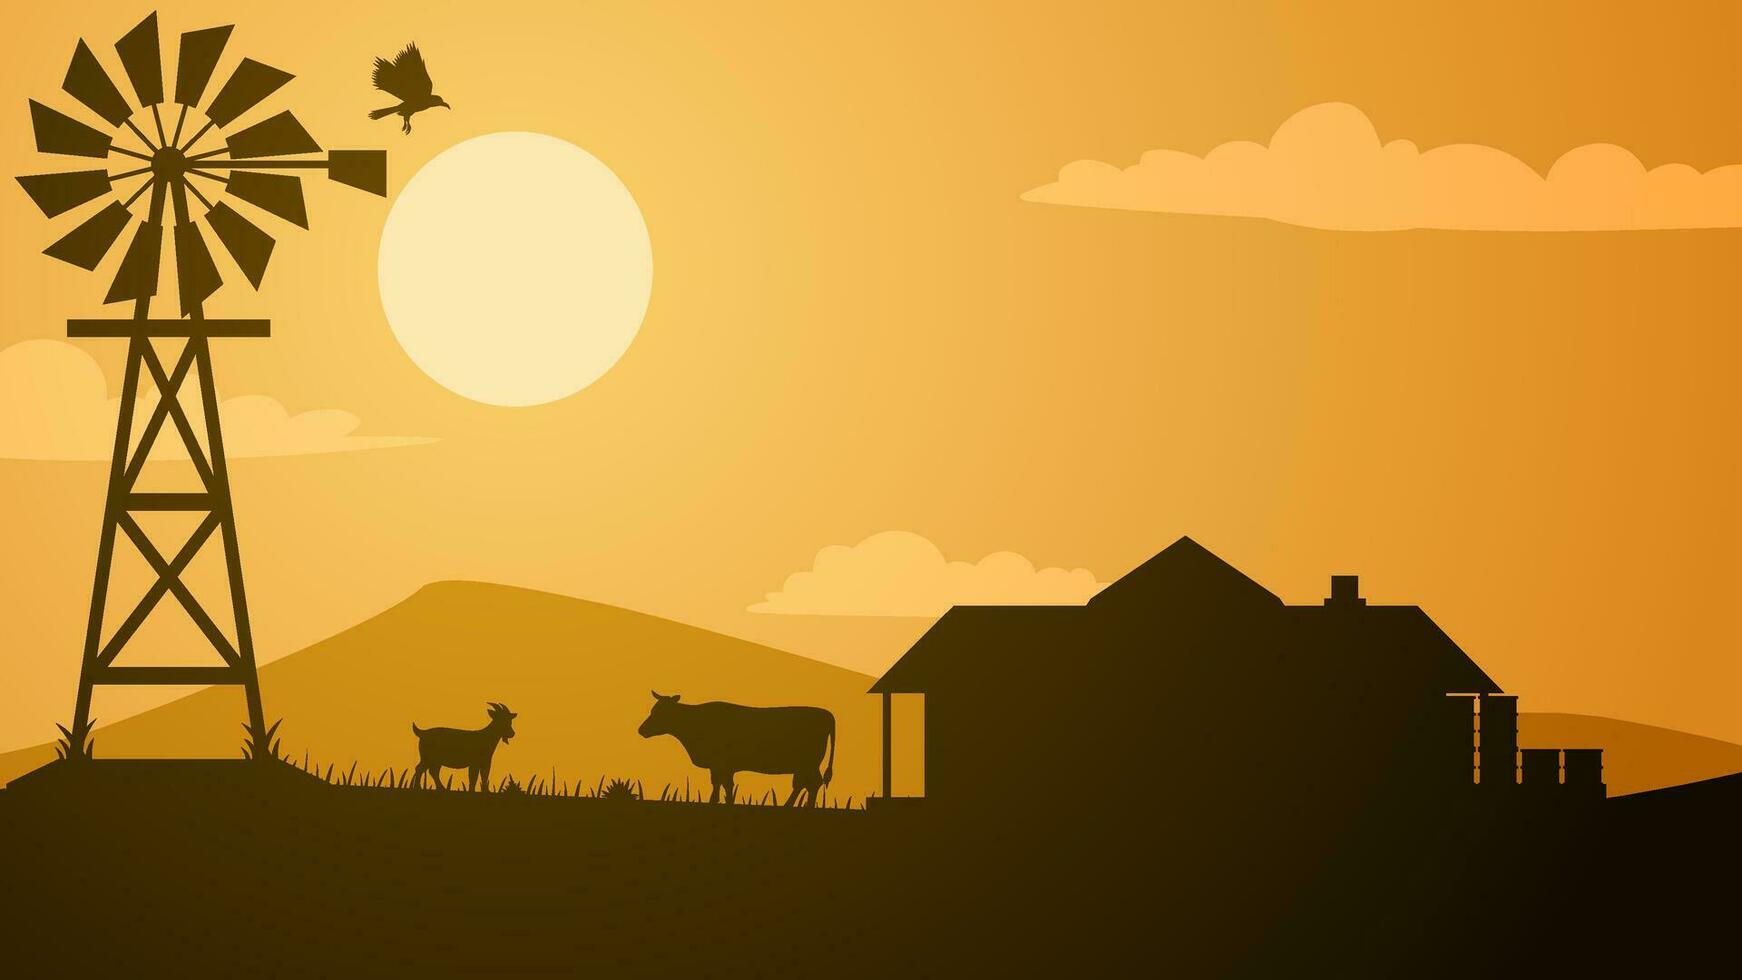 Farmland silhouette landscape vector illustration. Scenery of livestock cow and goat in the countryside farm. Rural landscape for illustration, background or wallpaper